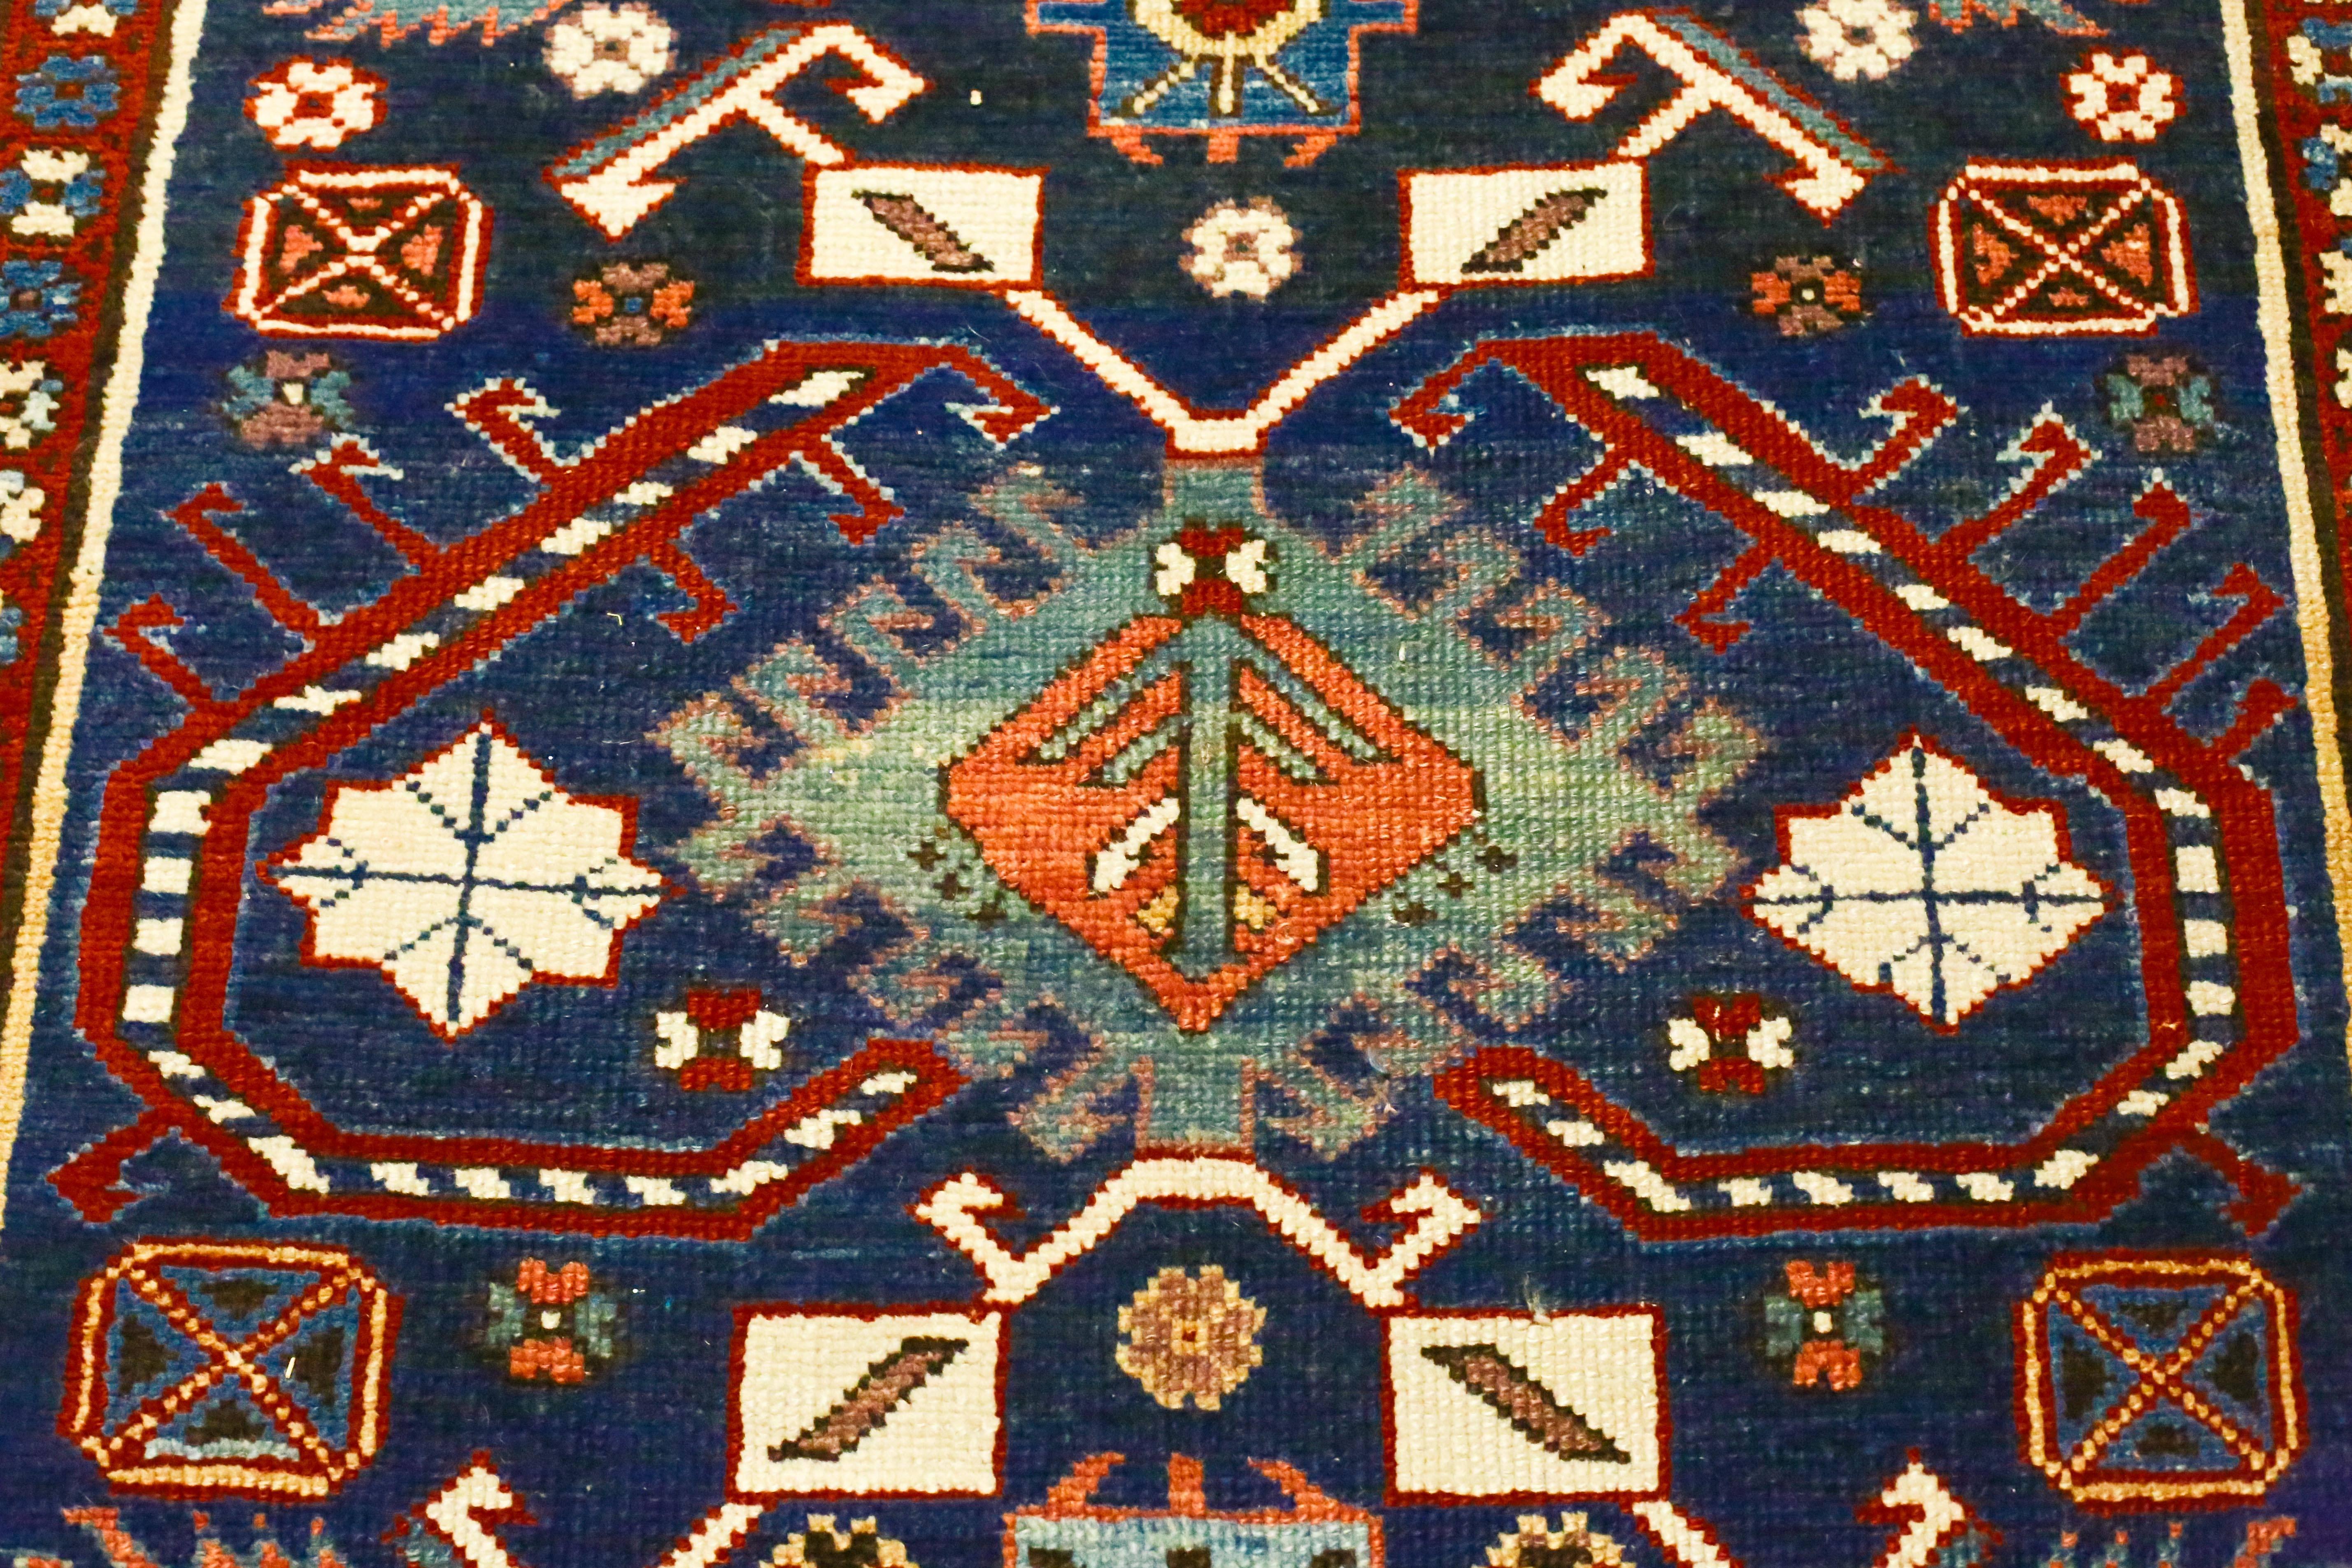 This is an antique Caucasian Kazak runner, circa 1870s. It is in mint condition with bold colors. It features bracketed medallions surrounded by a lively display of angular animals and symbols in dark navy field with accents on red, orange, ivory,